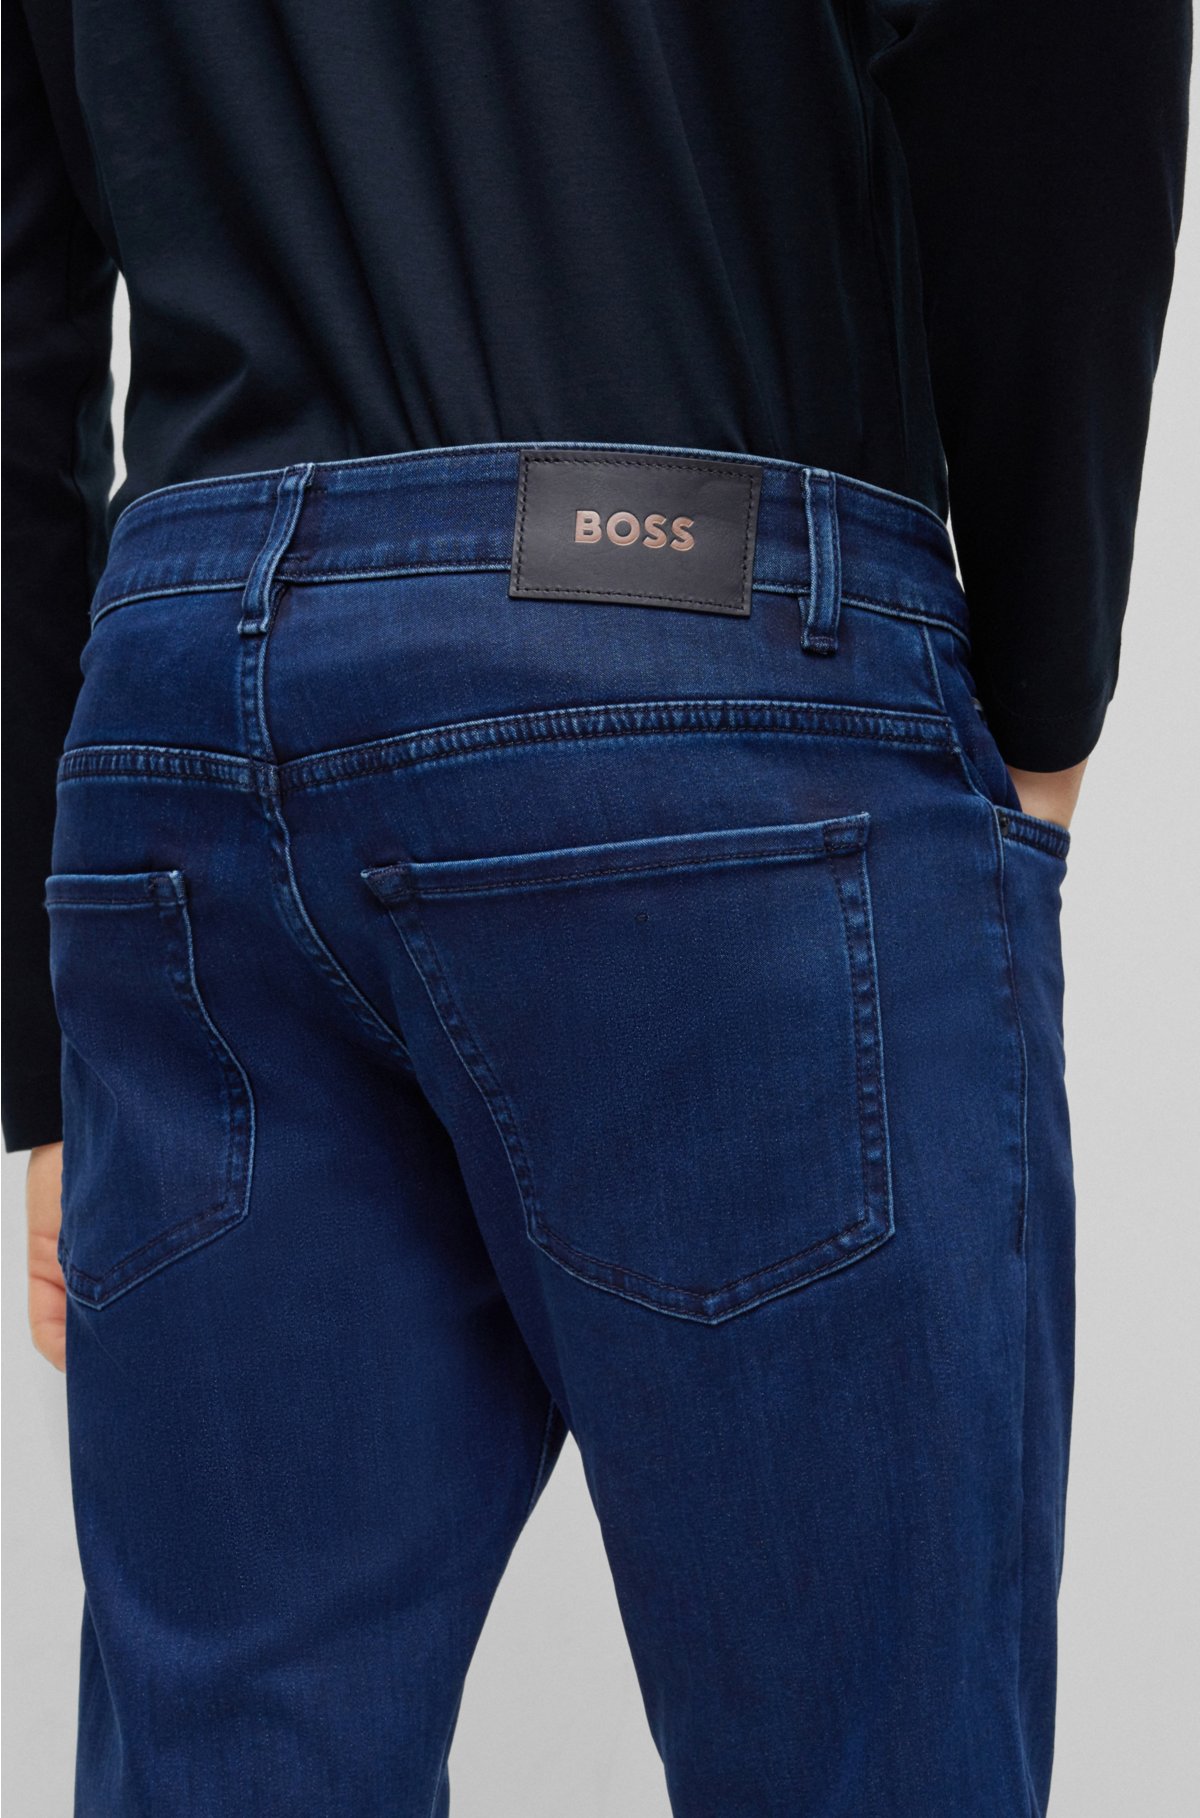 jeans - denim Slim-fit satin-touch in BOSS blue